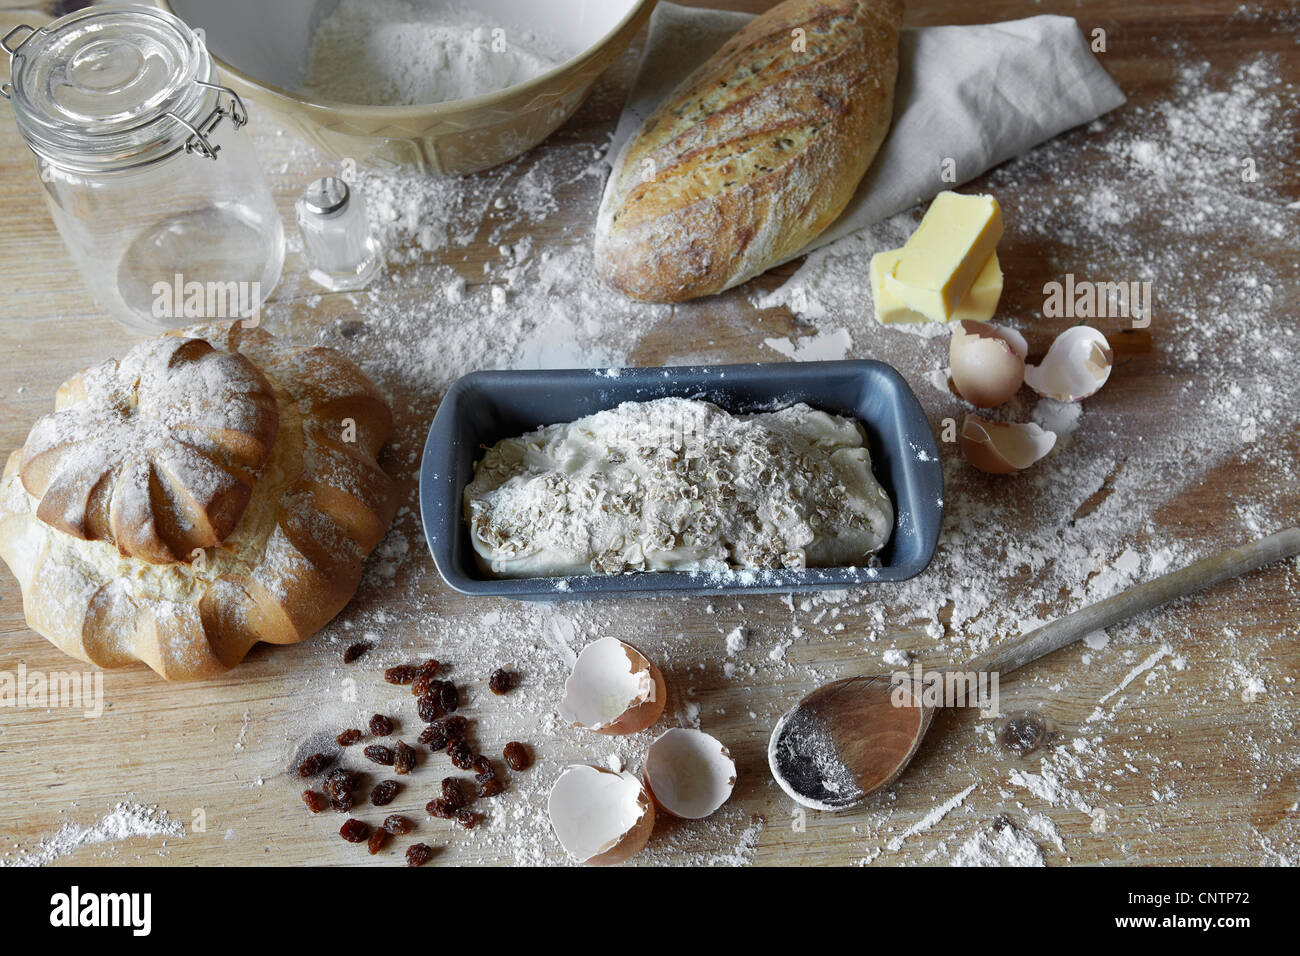 https://c8.alamy.com/comp/CNTP72/bread-loaves-and-dough-in-messy-kitchen-CNTP72.jpg